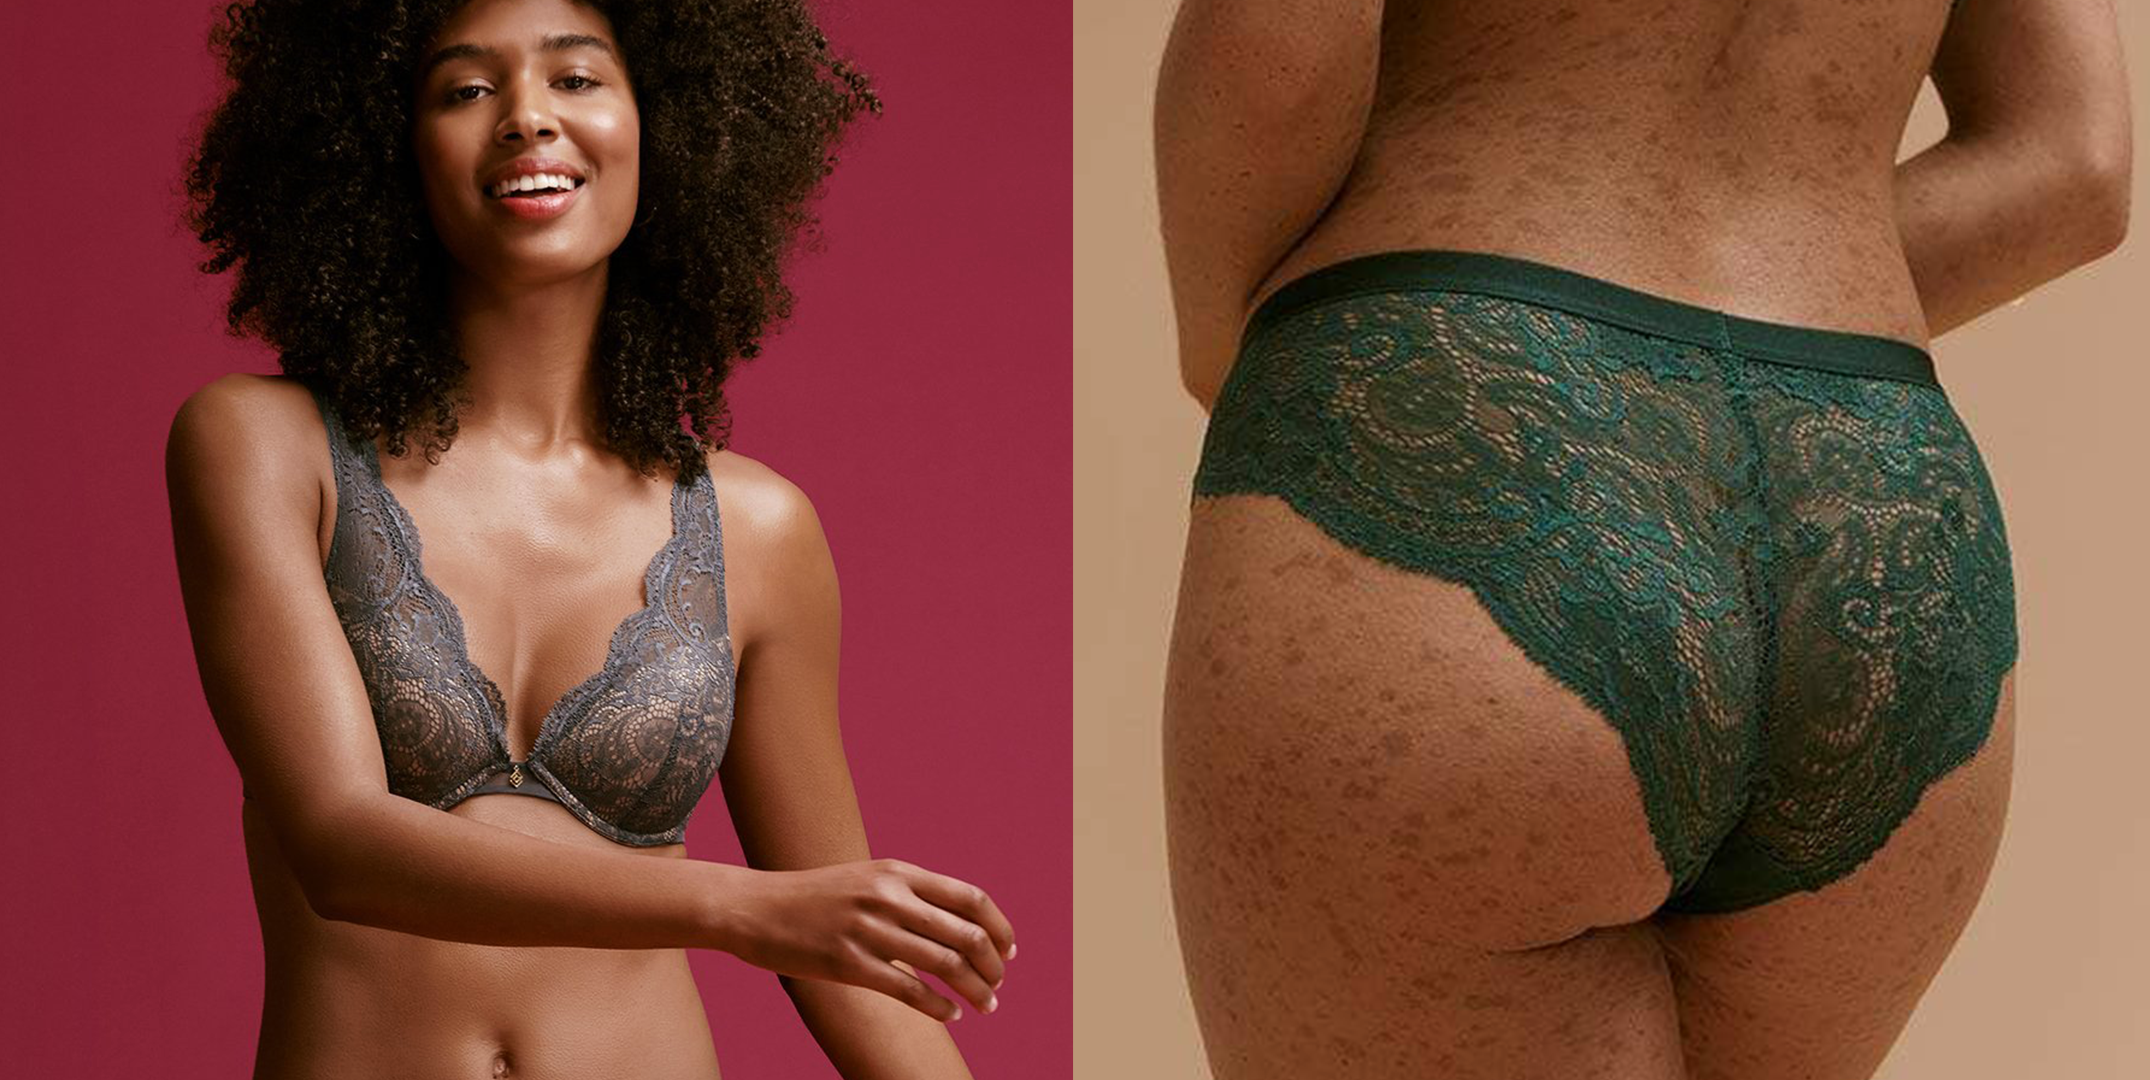 Score Up to 70 Percent Off Lingerie at Intimacy's Semi-Annual Sale